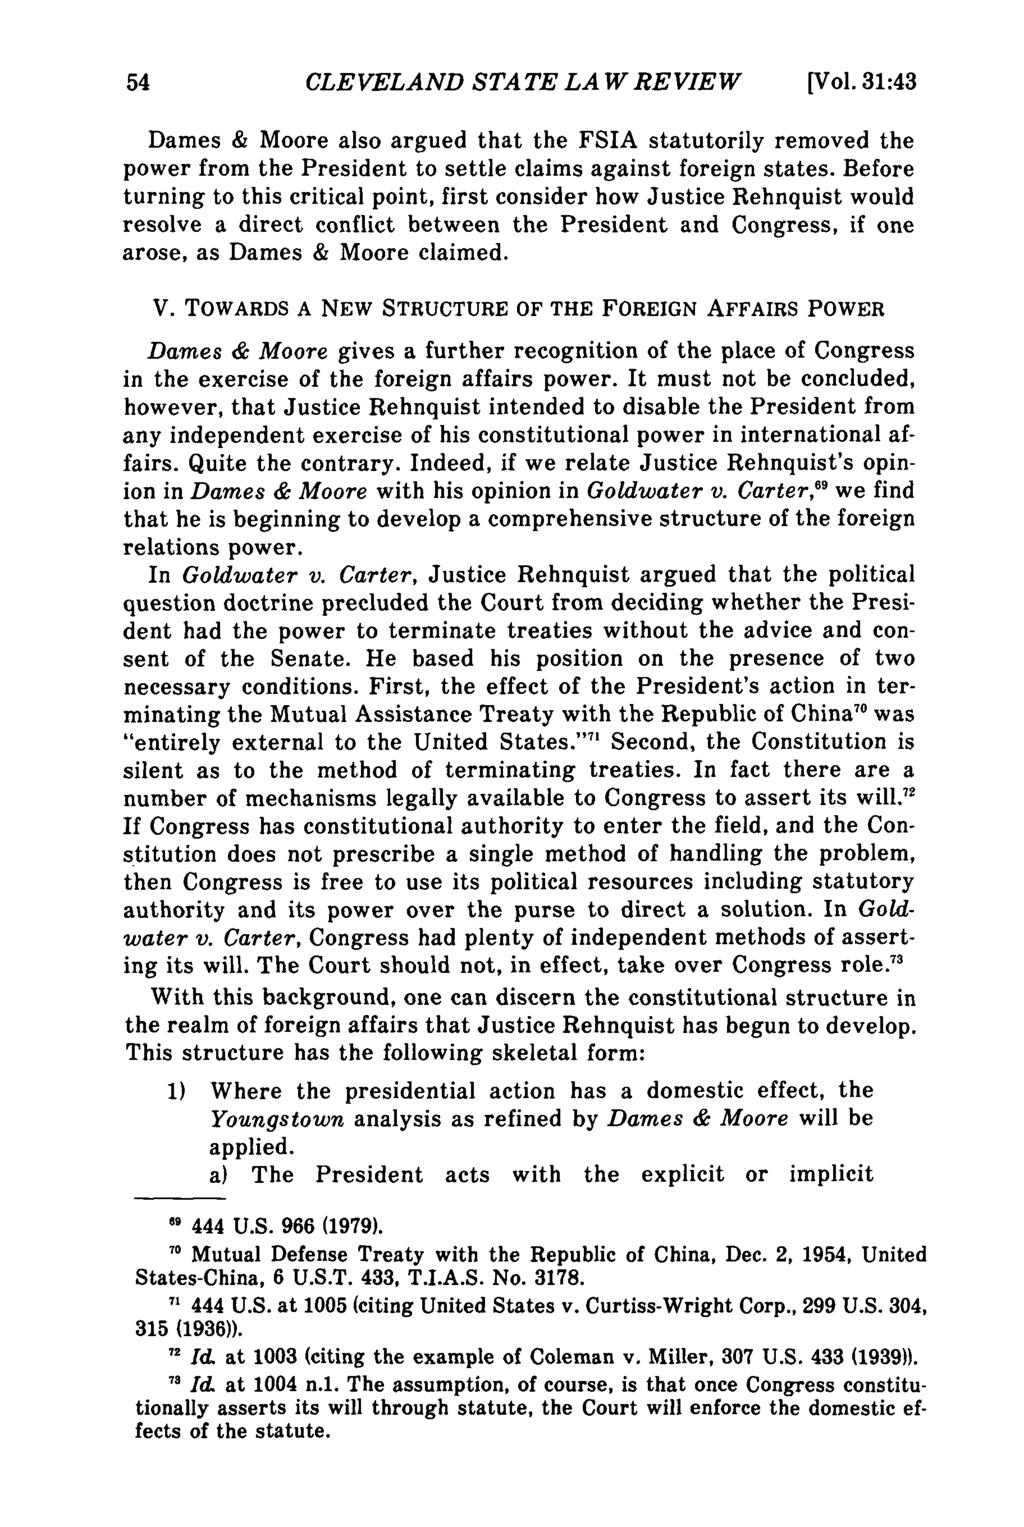 CLEVELAND STATE LAW REVIEW [Vol. 31:43 Dames & Moore also argued that the FSIA statutorily removed the power from the President to settle claims against foreign states.